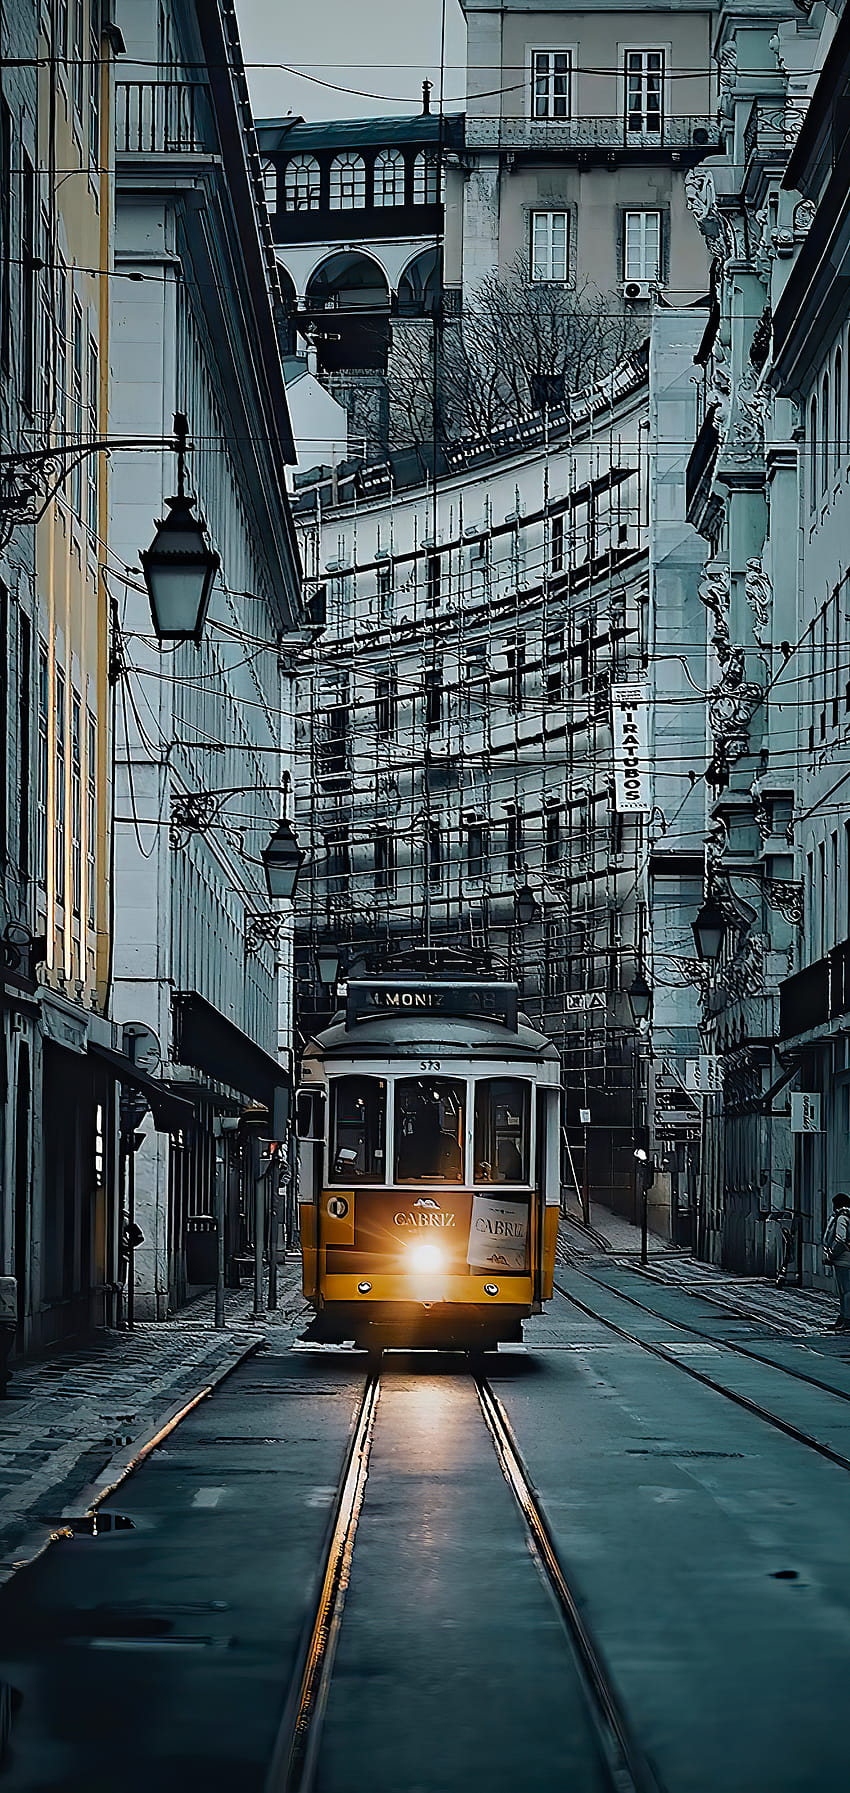 Check out these streetcar for your iPhone, trolley HD phone wallpaper